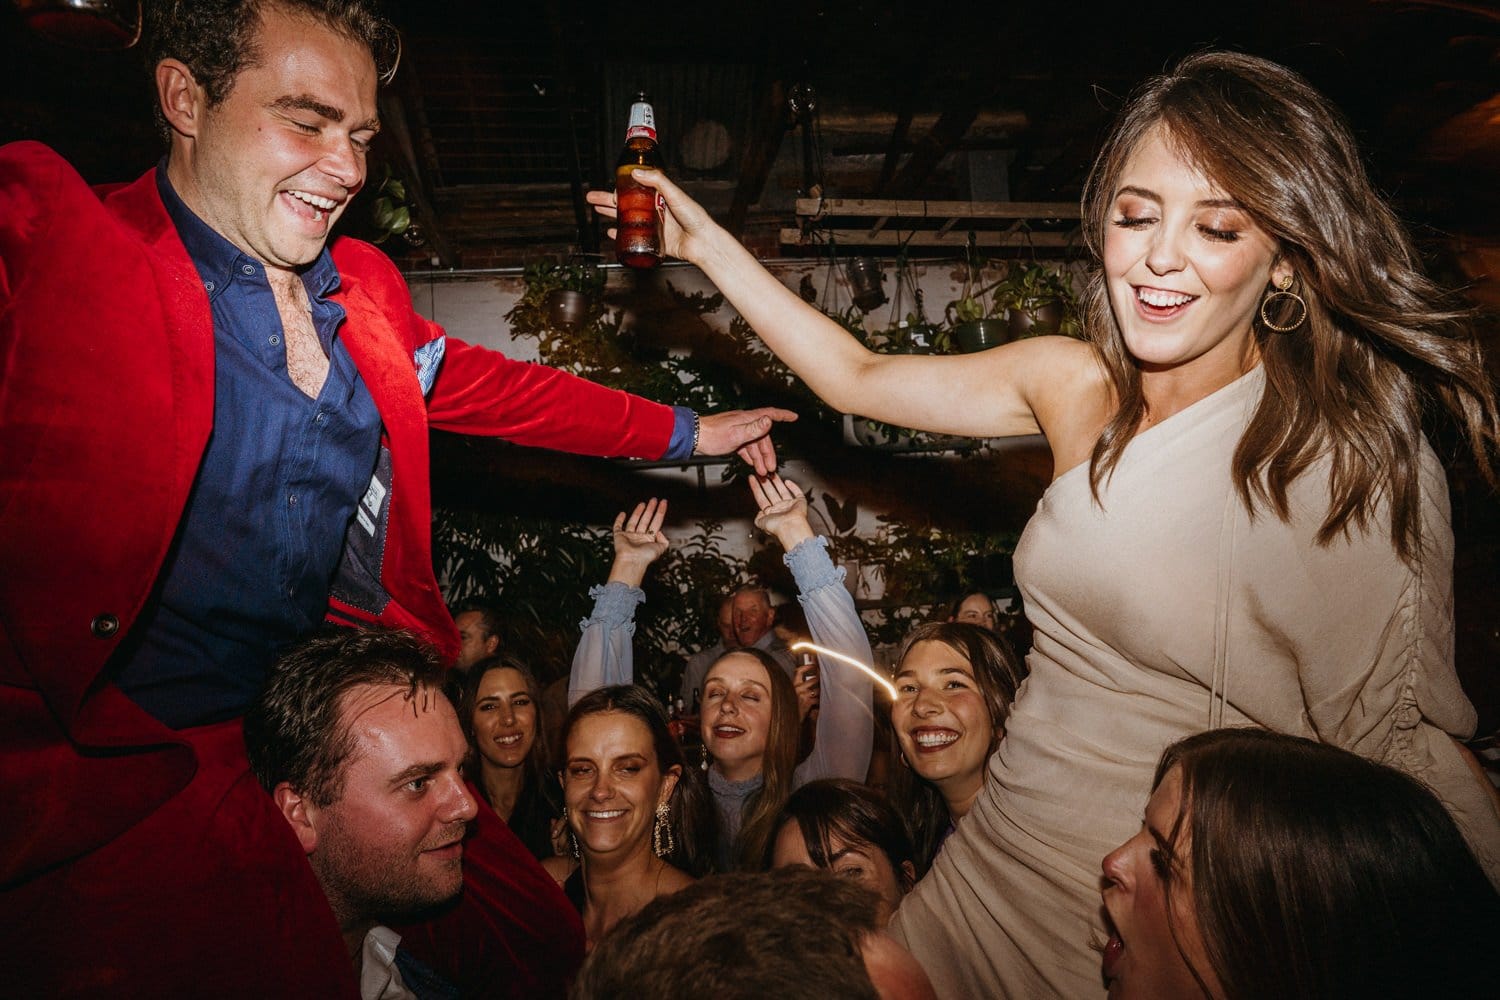 Bride And Groom Riding On Guests' Shoulders at Glasshaus Wedding Reception